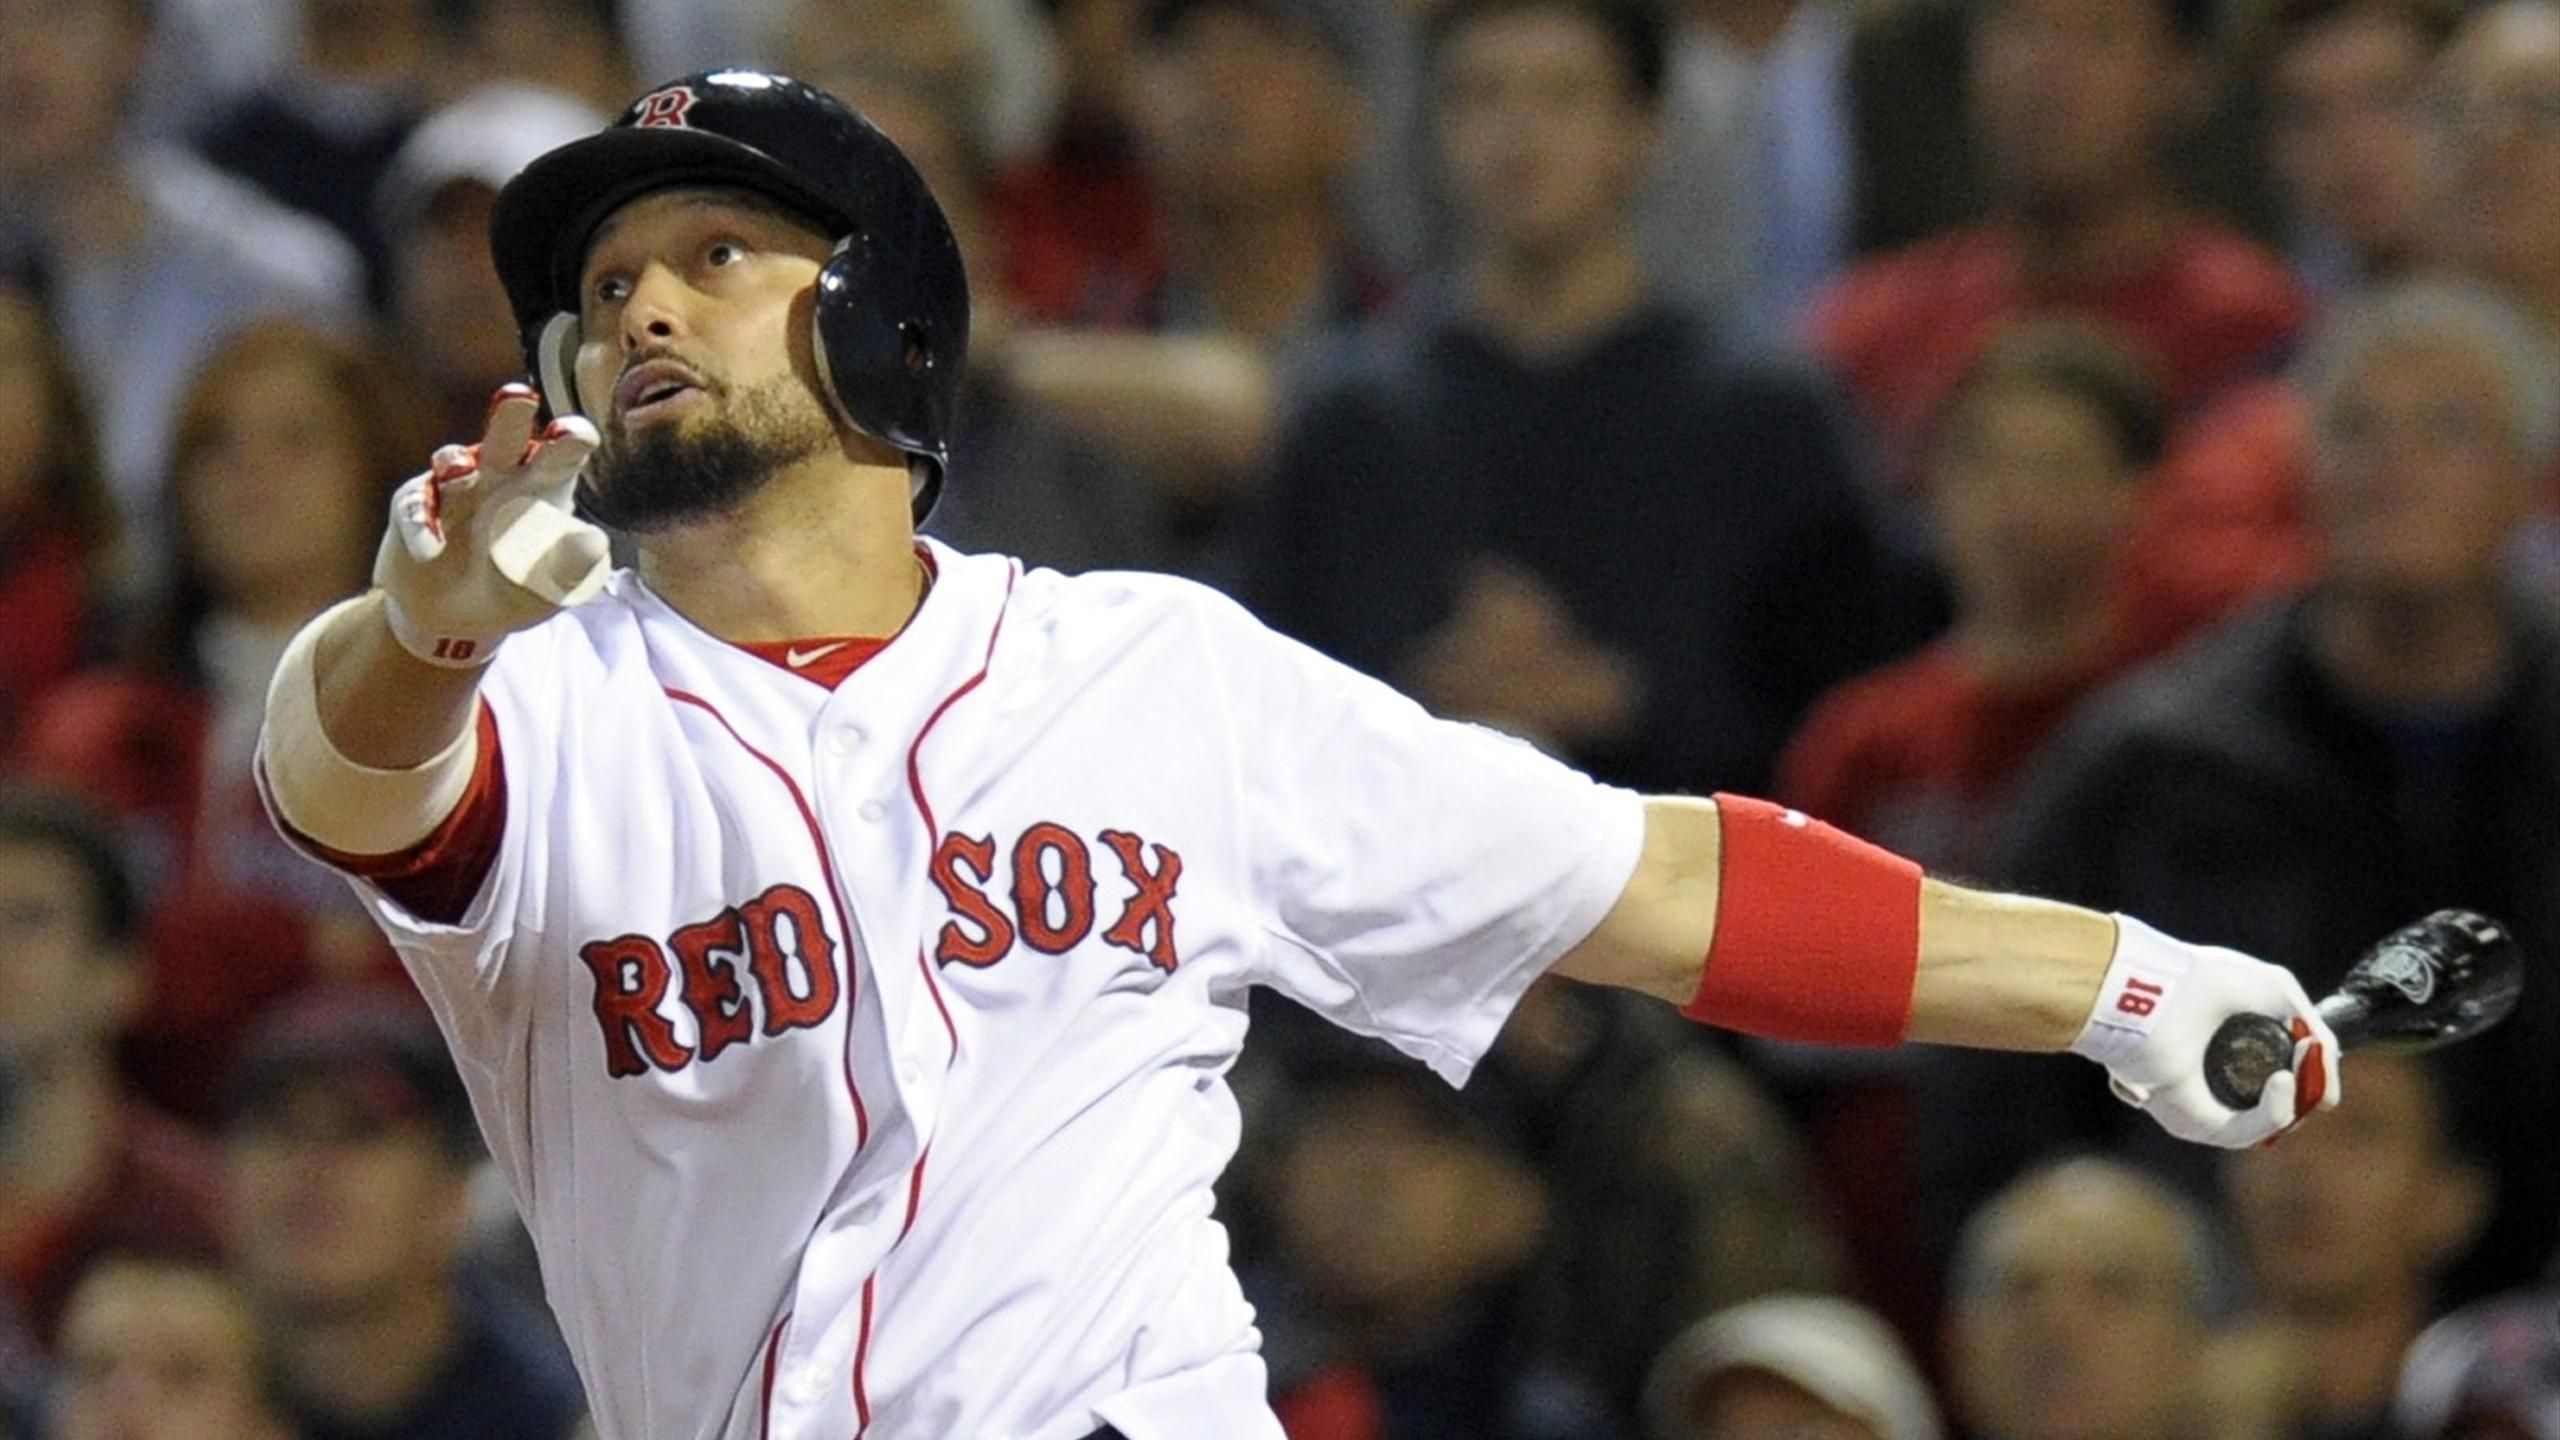 Shane Victorino toughing it out for Red Sox - The Boston Globe